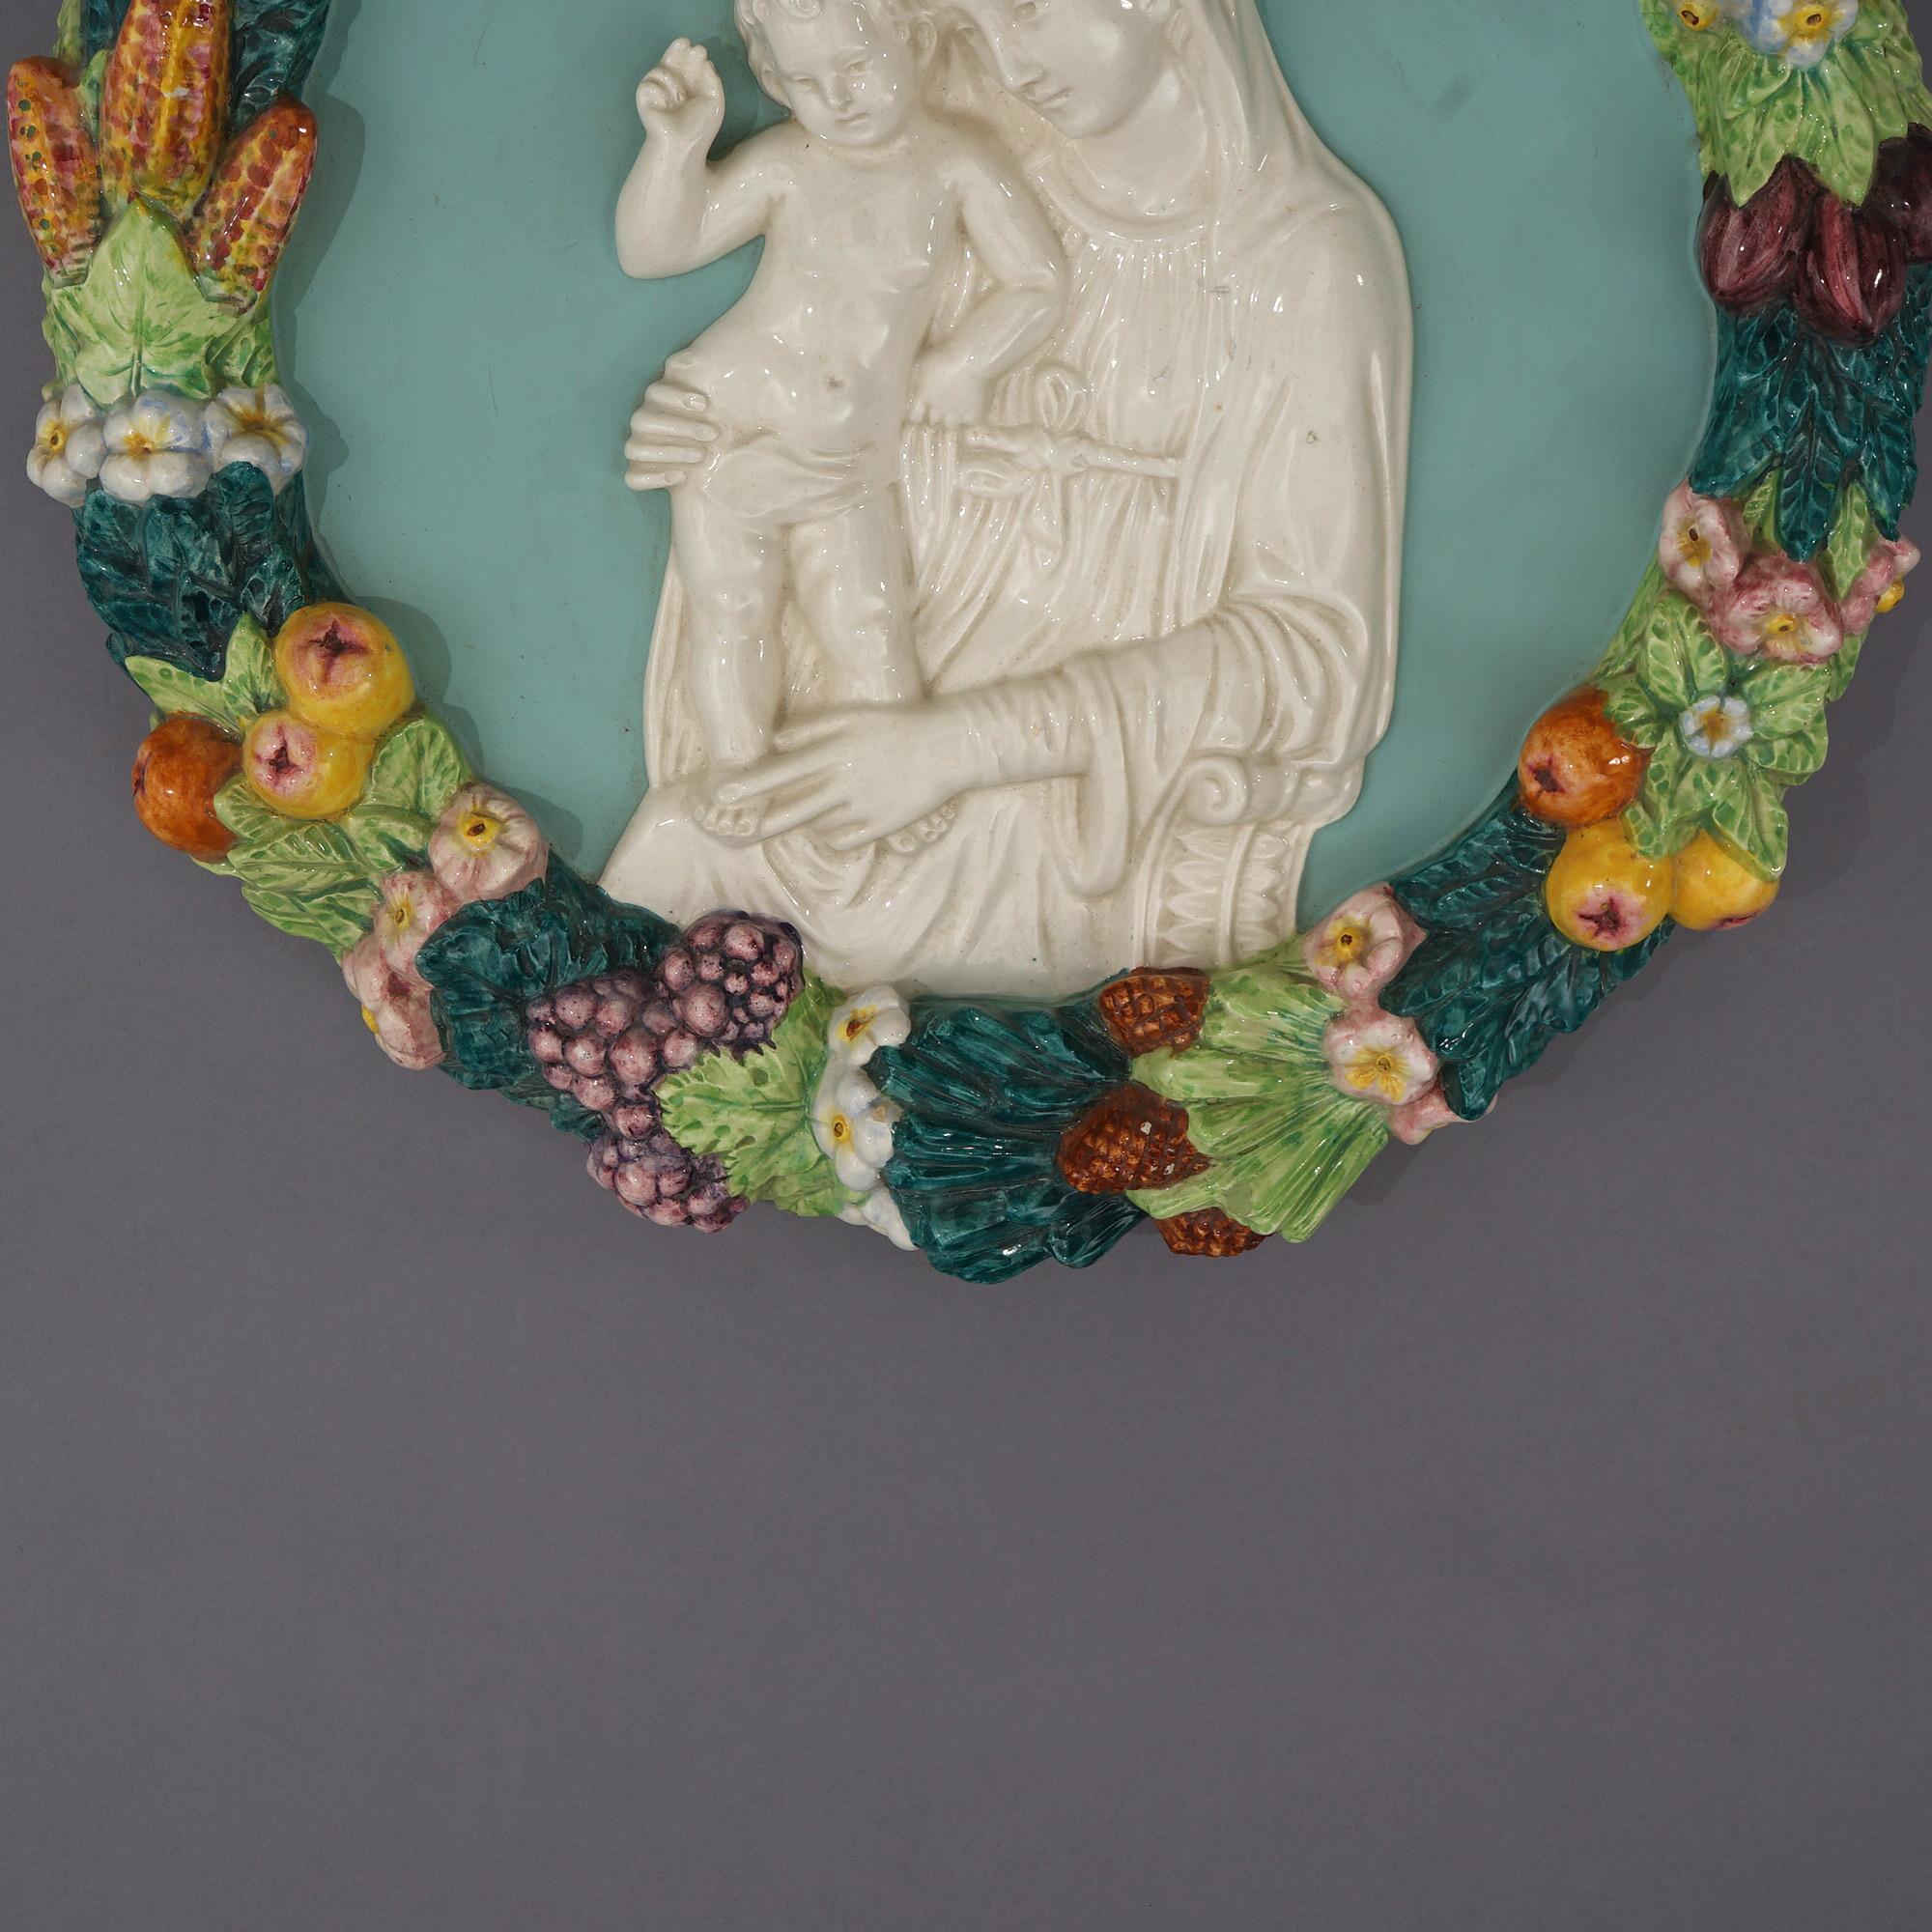 Italian Della Robin Pottery Plaque of Mary & Child with Fruit Wreath 20th C For Sale 2